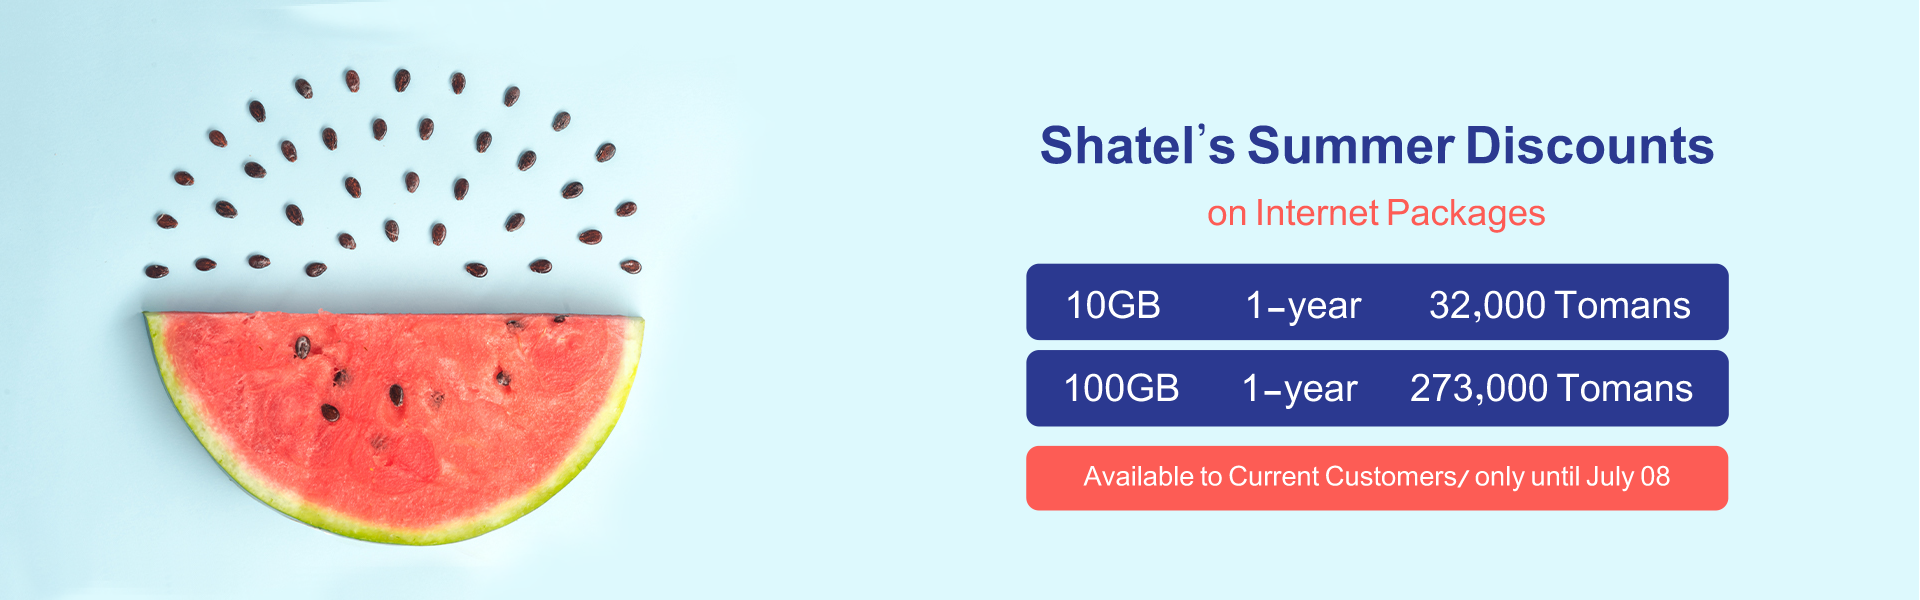 Shatel’s Special Offers on First Days of Summer!